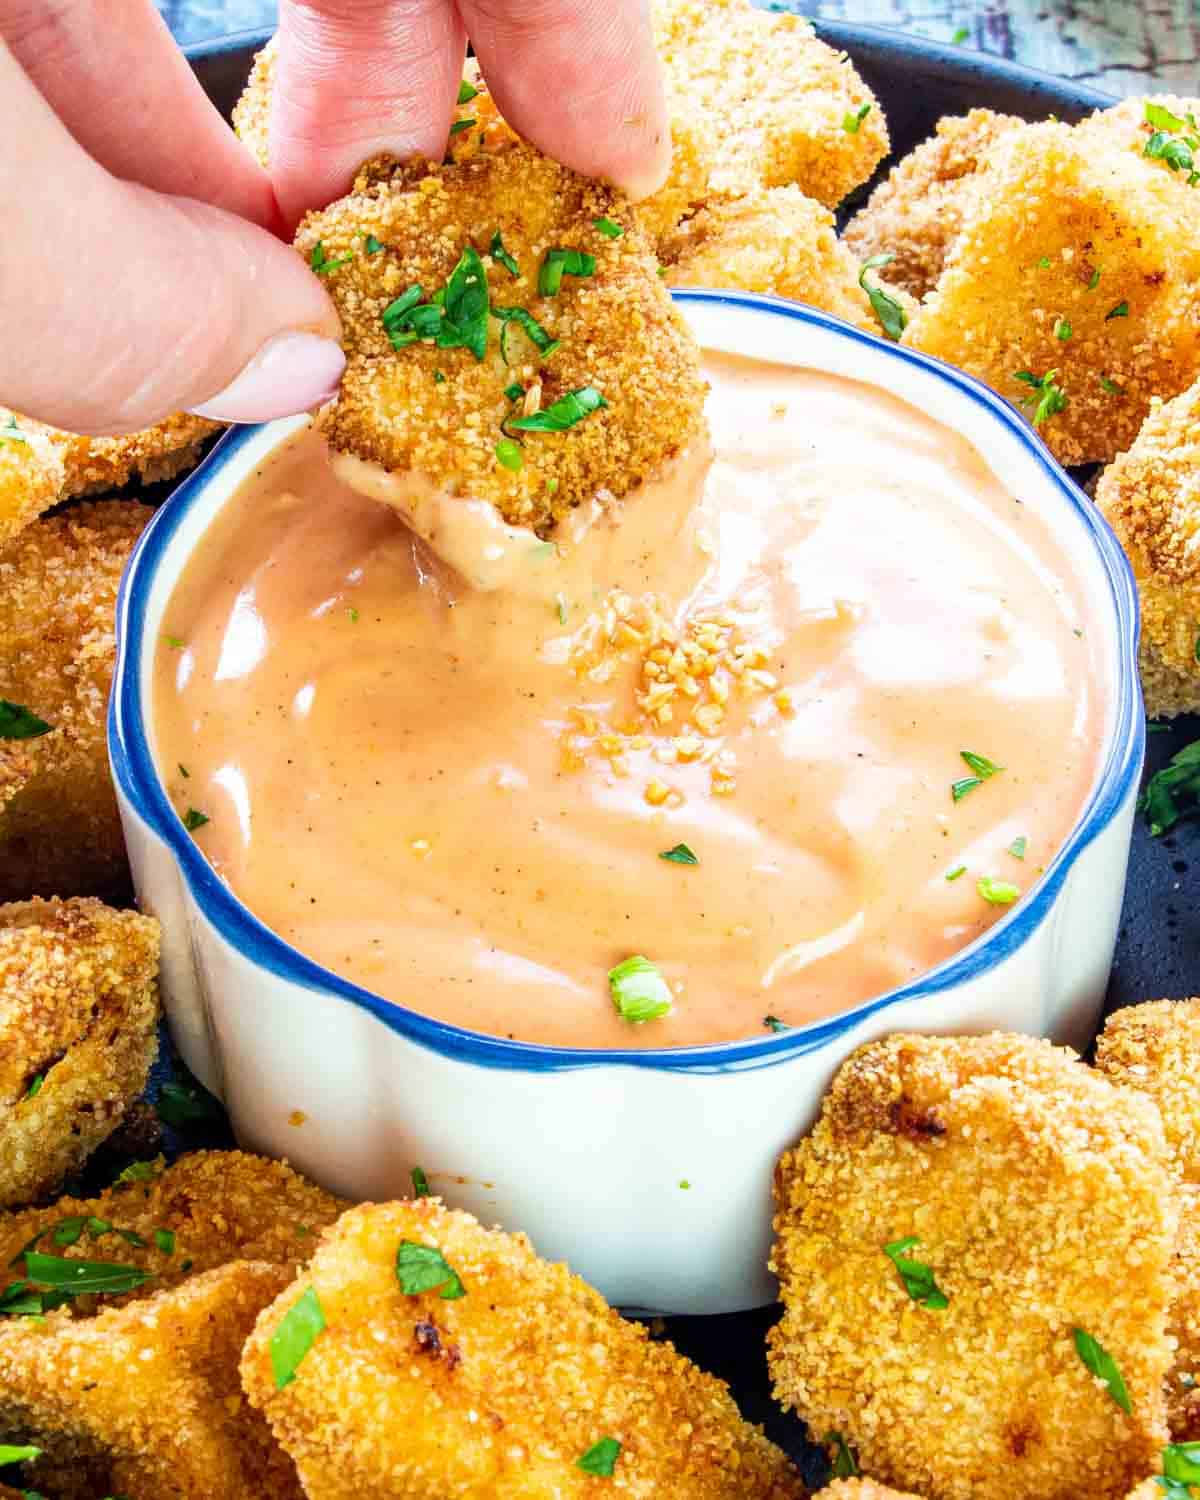 a hand dipping a chicken nugget in a bowl with fry sauce.